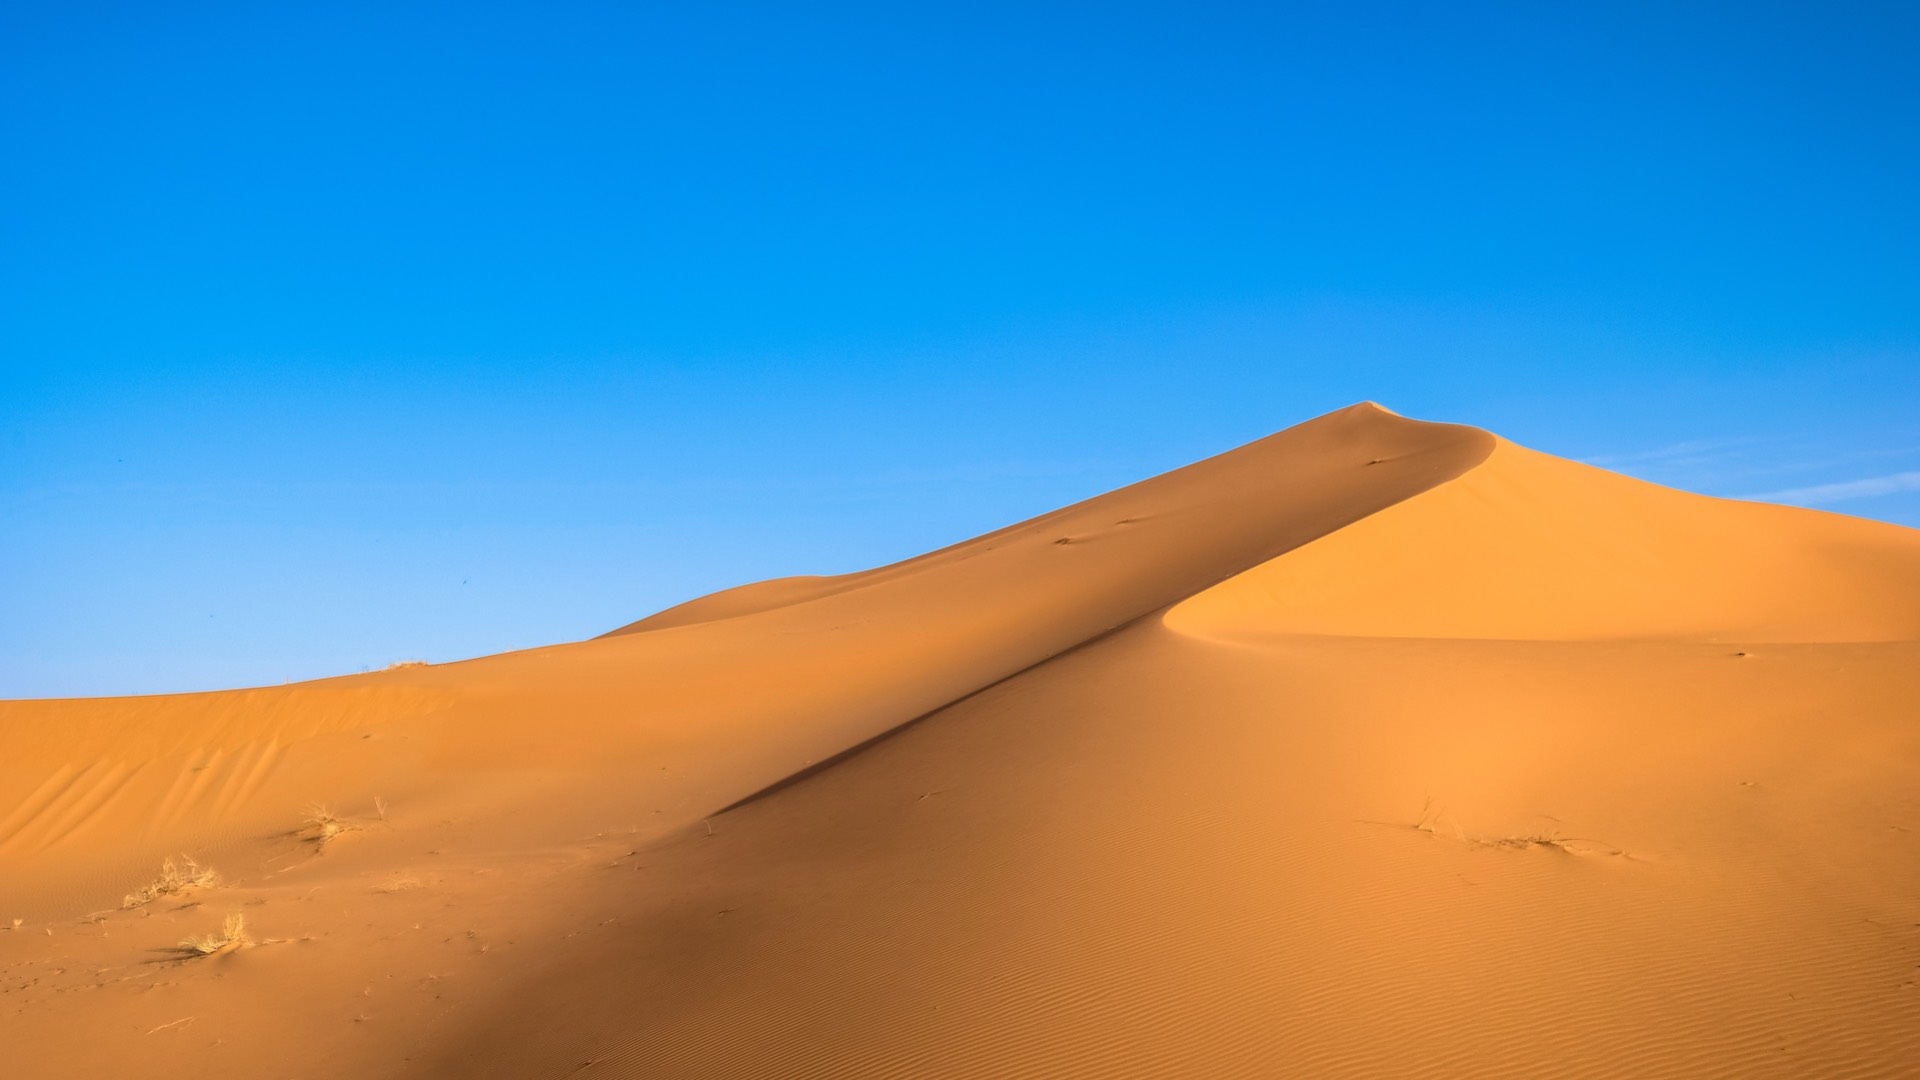 A Large Sand Dune With A Blue Sky In The Background Zoom Backgrounds Template